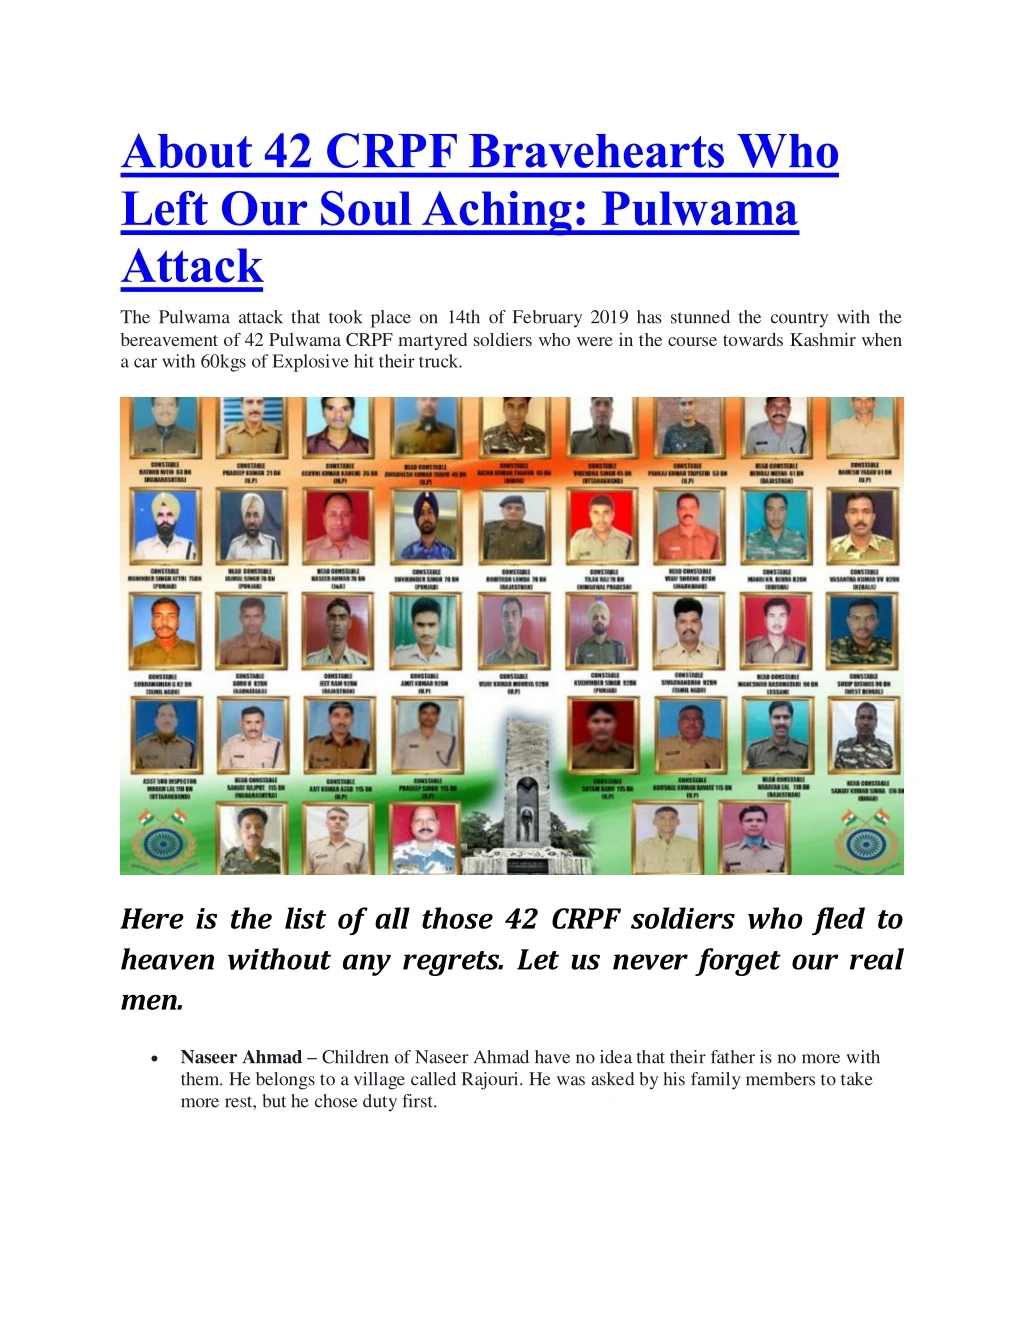 about 42 crpf bravehearts who left our soul